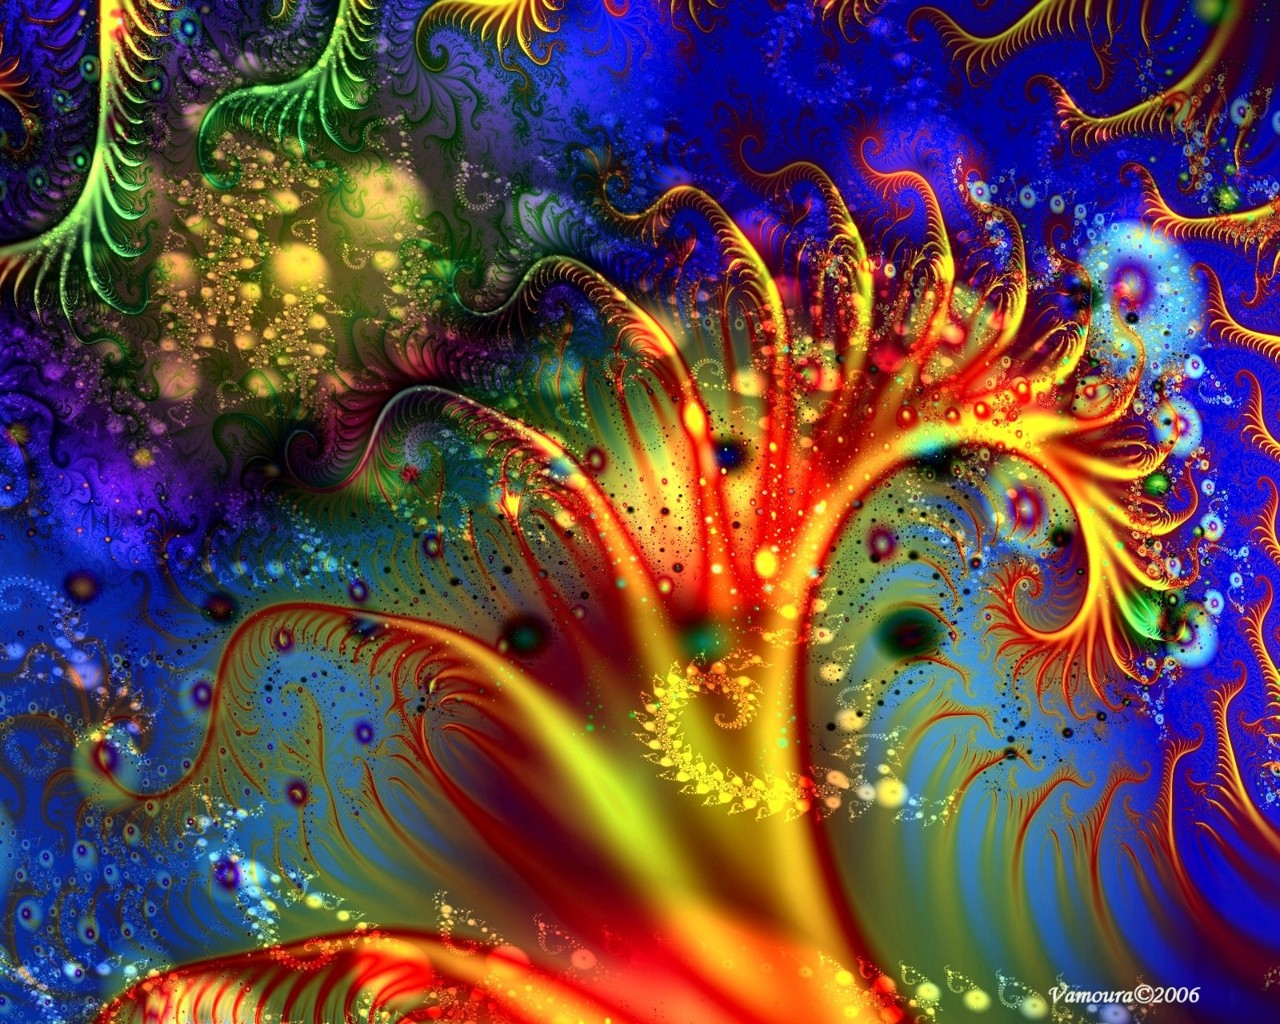 rate select rating give colorful fractals 1 5 give colorful fractals 2